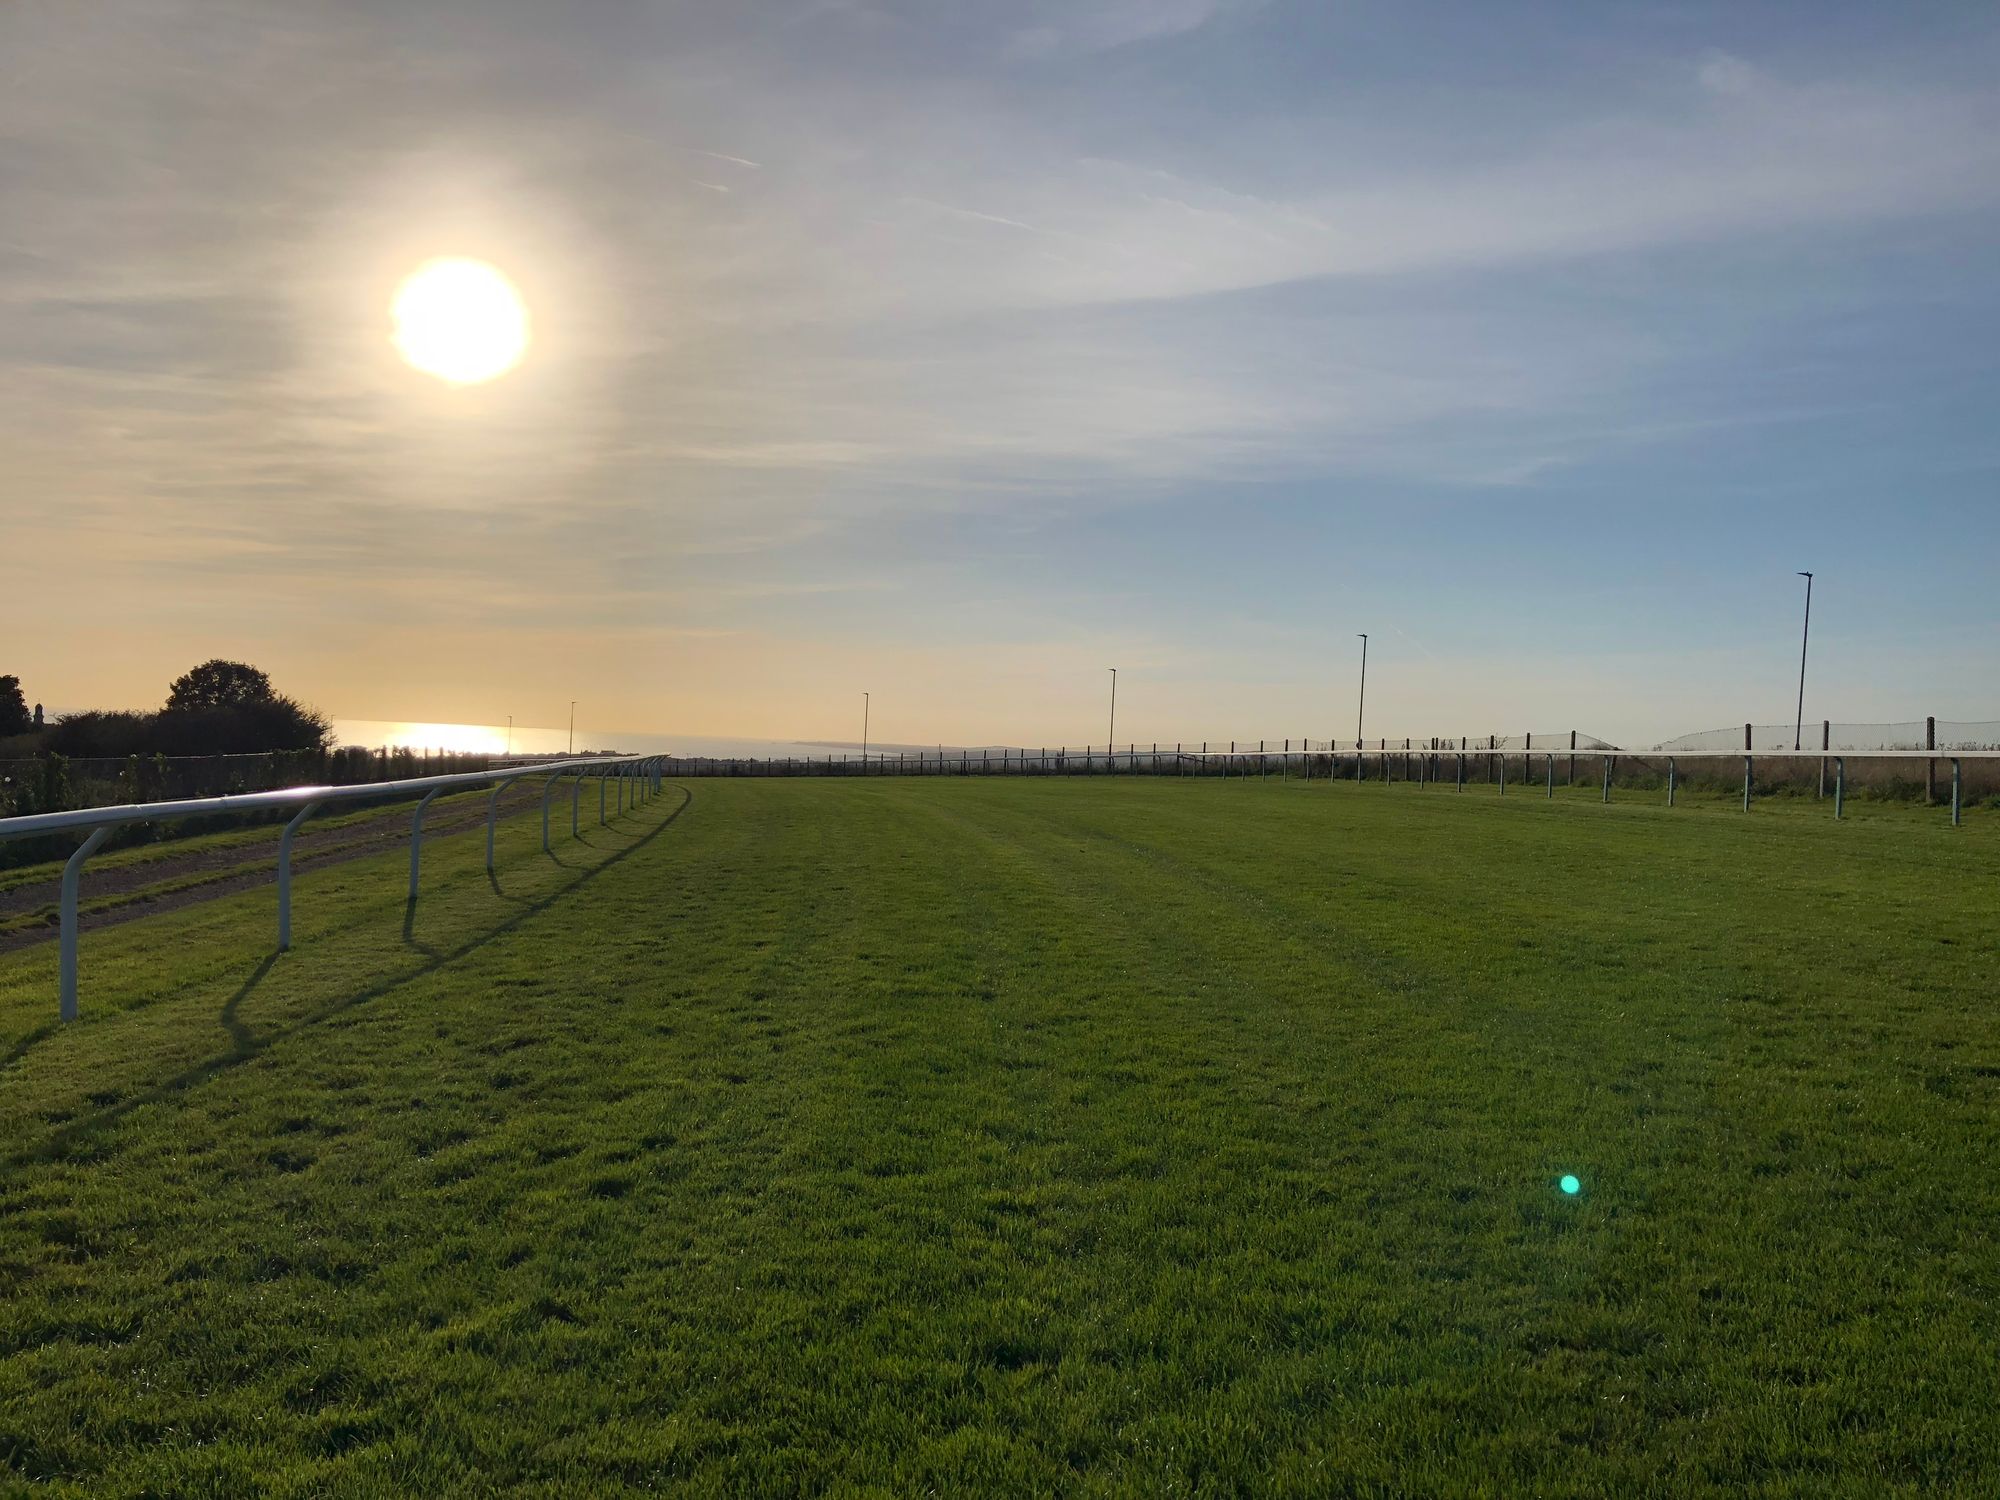 Picture of the sun high in the sky over the racecourse, with views down to the sea